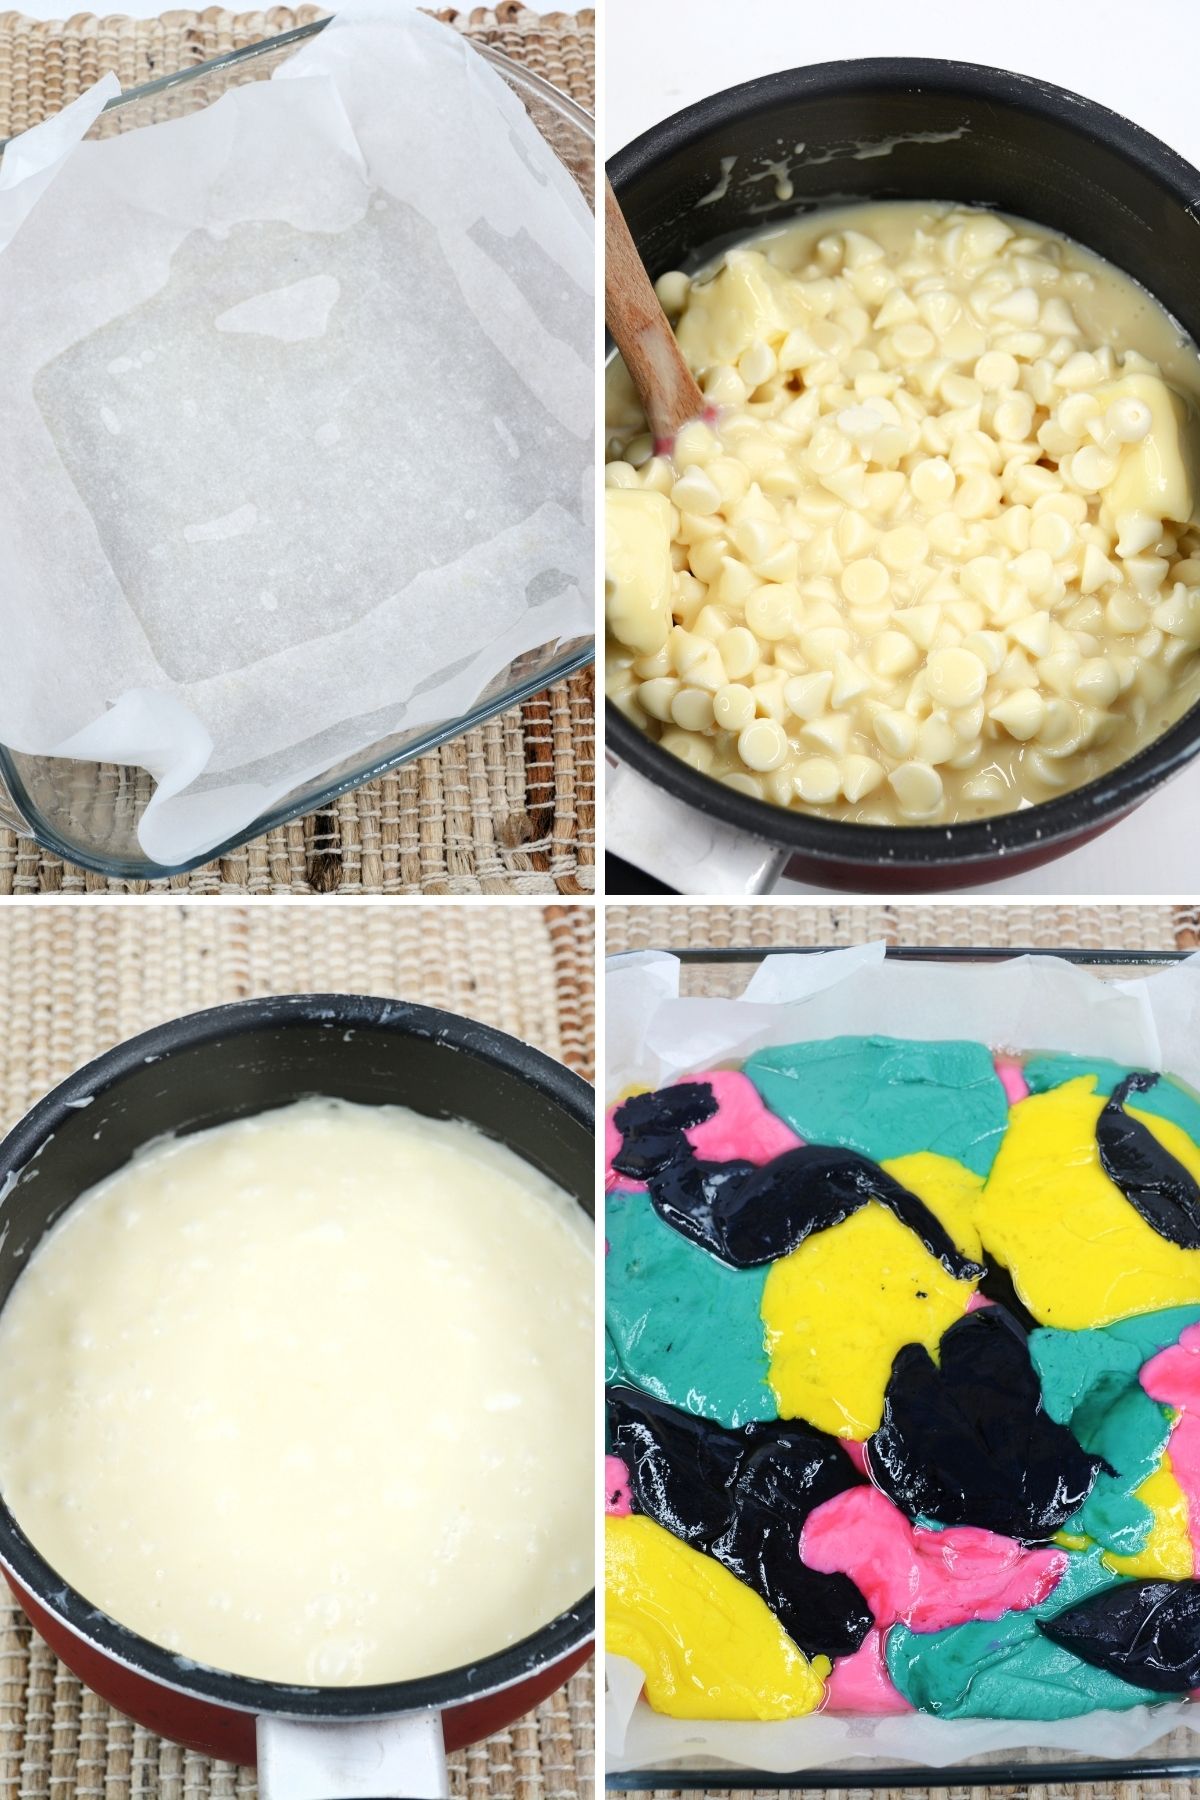 four photos of the process: glass baking dish lined with wax paper; sauce pan with ingredients being melted; melted white fudge in sauce pan; teal, black, yellow, and pink fudge mixture in baking dish